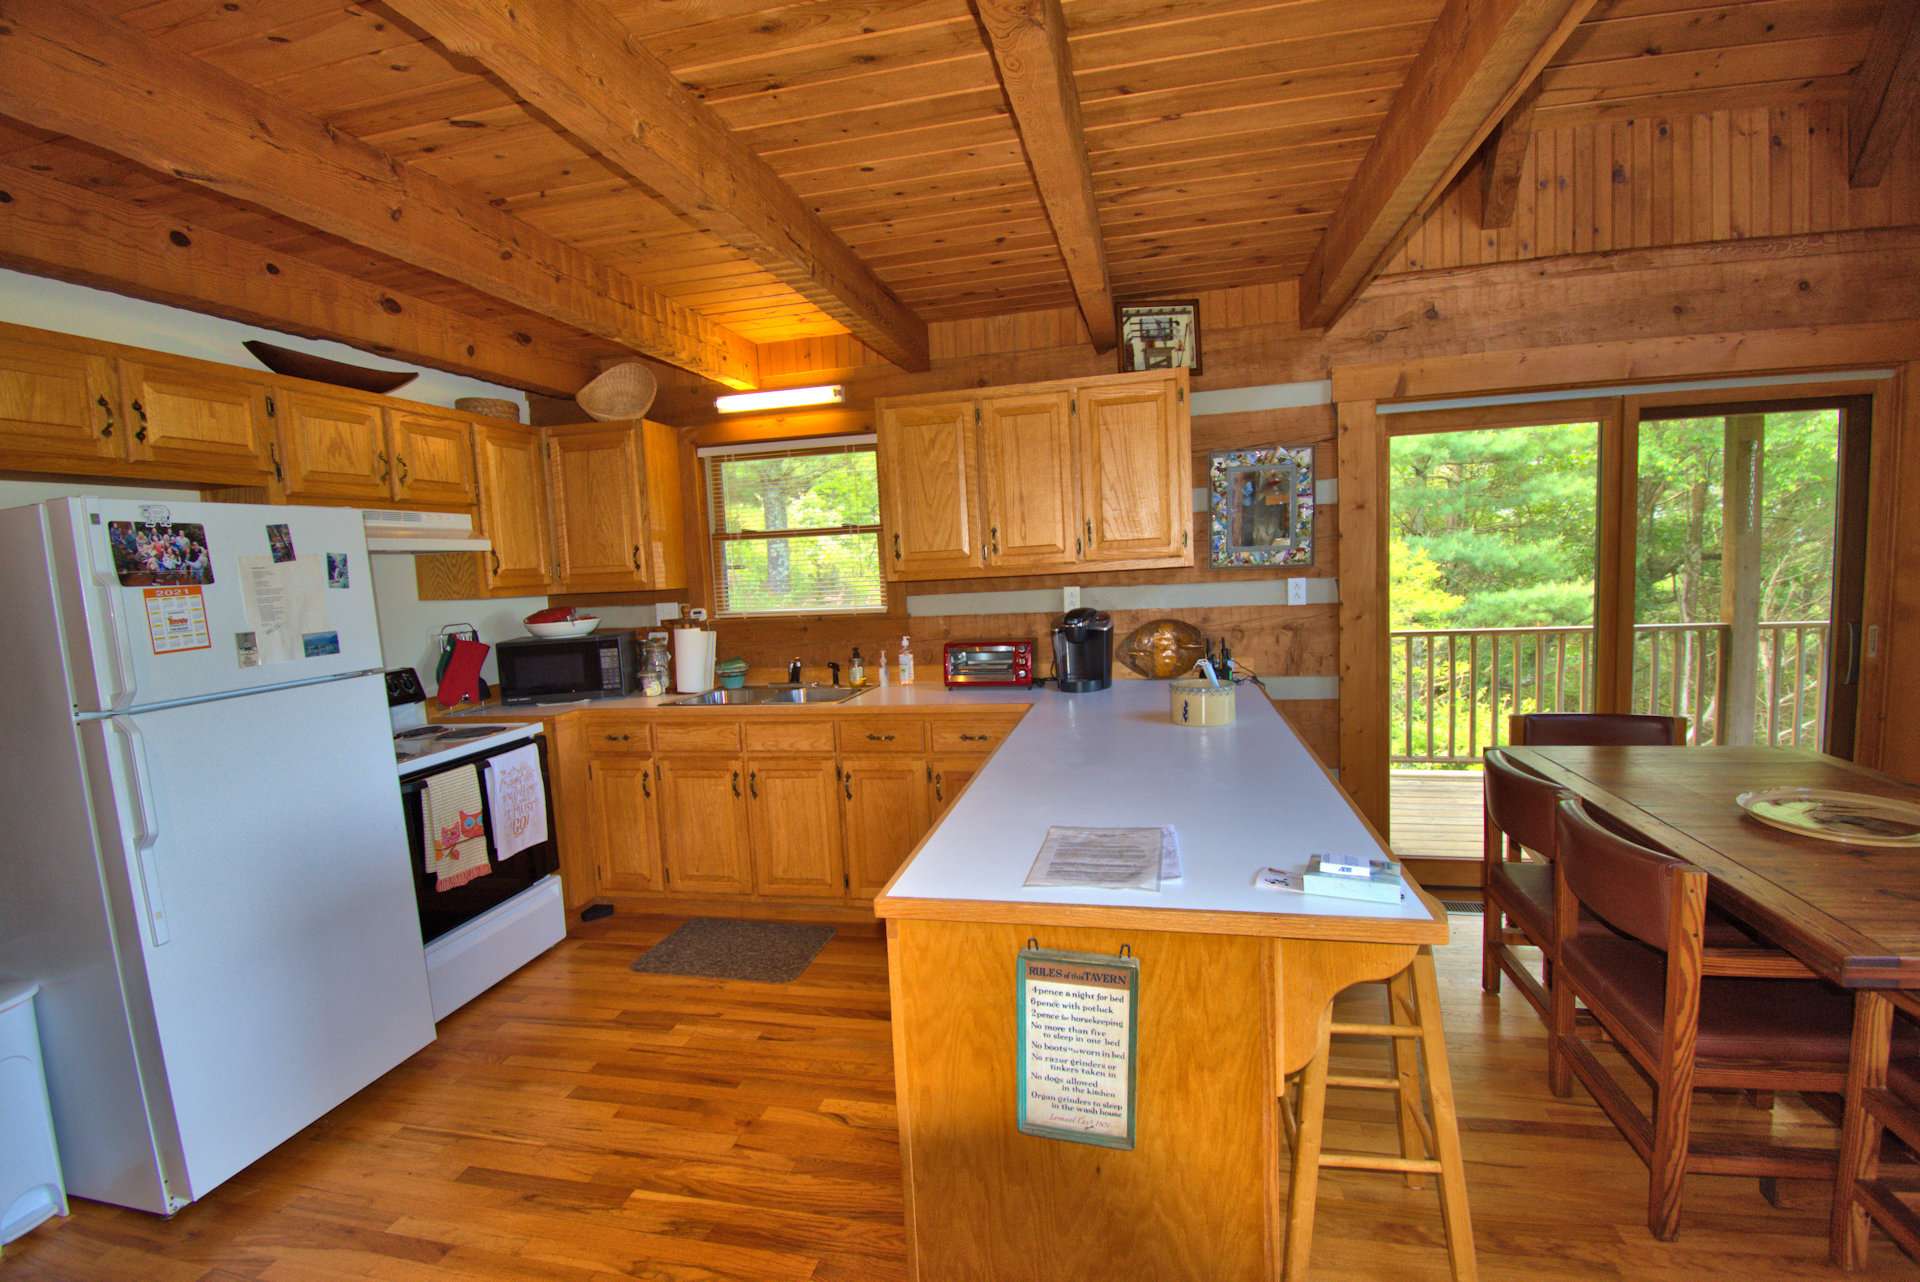 The kitchen is amply sized and features exposed beams and a bar with seating for those quick meals on the go in the mountains.